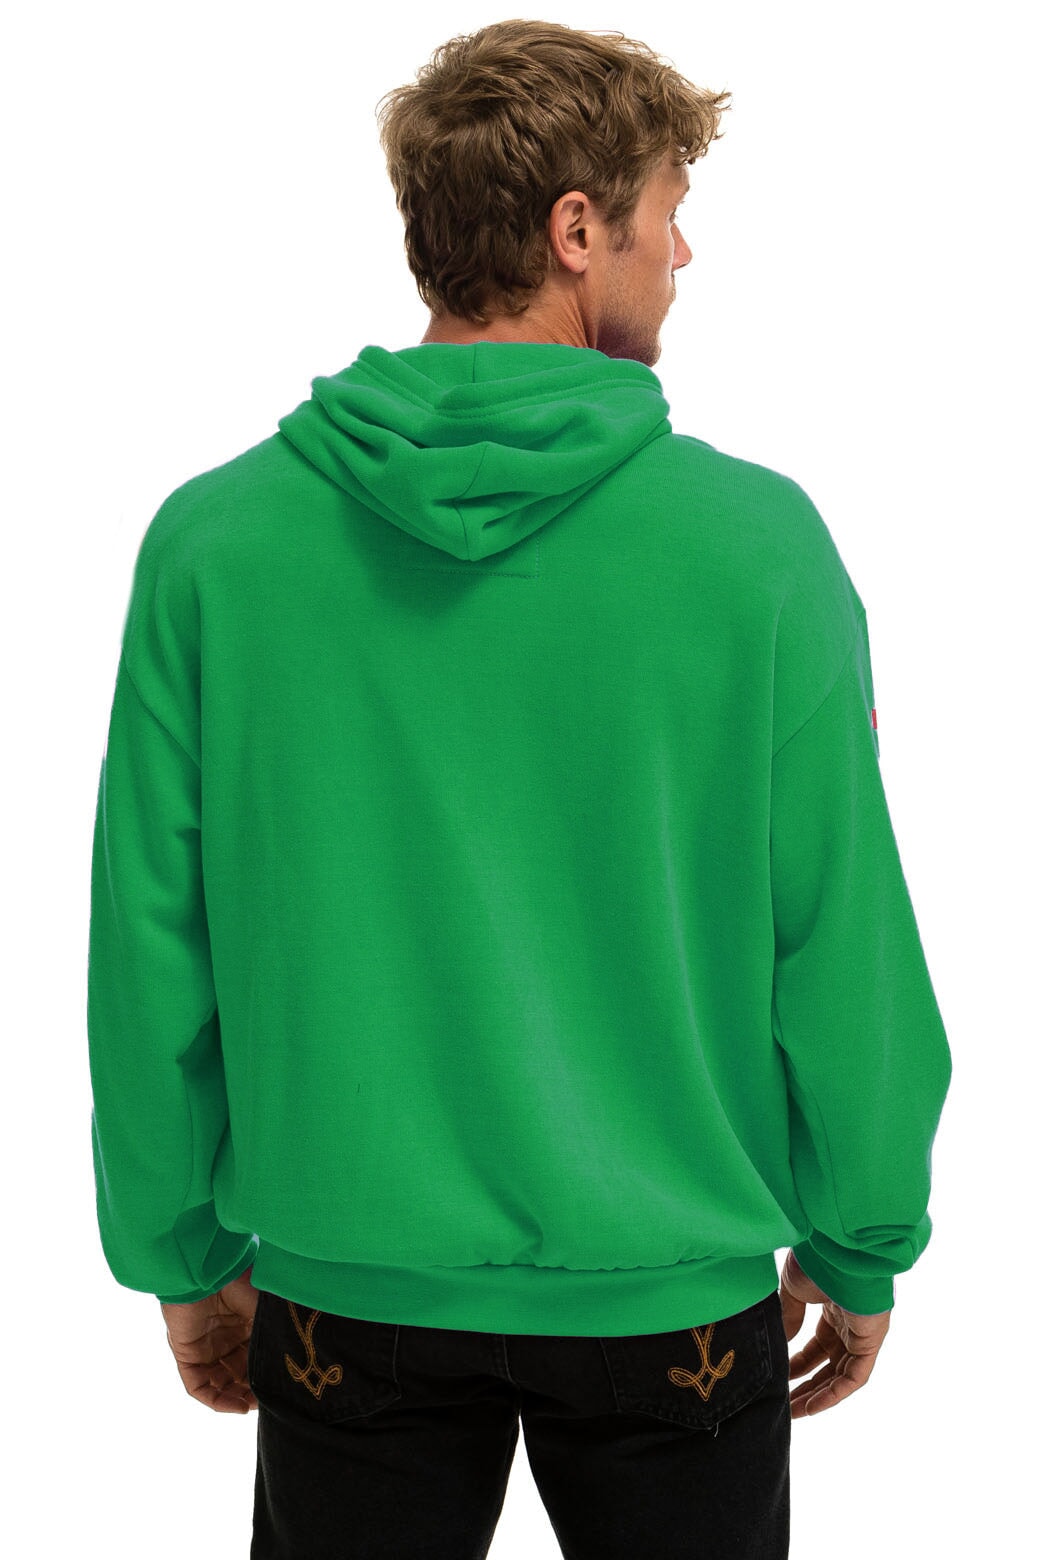 AVIATOR NATION RELAXED PULLOVER HOODIE - KELLY GREEN Hoodie Aviator Nation 